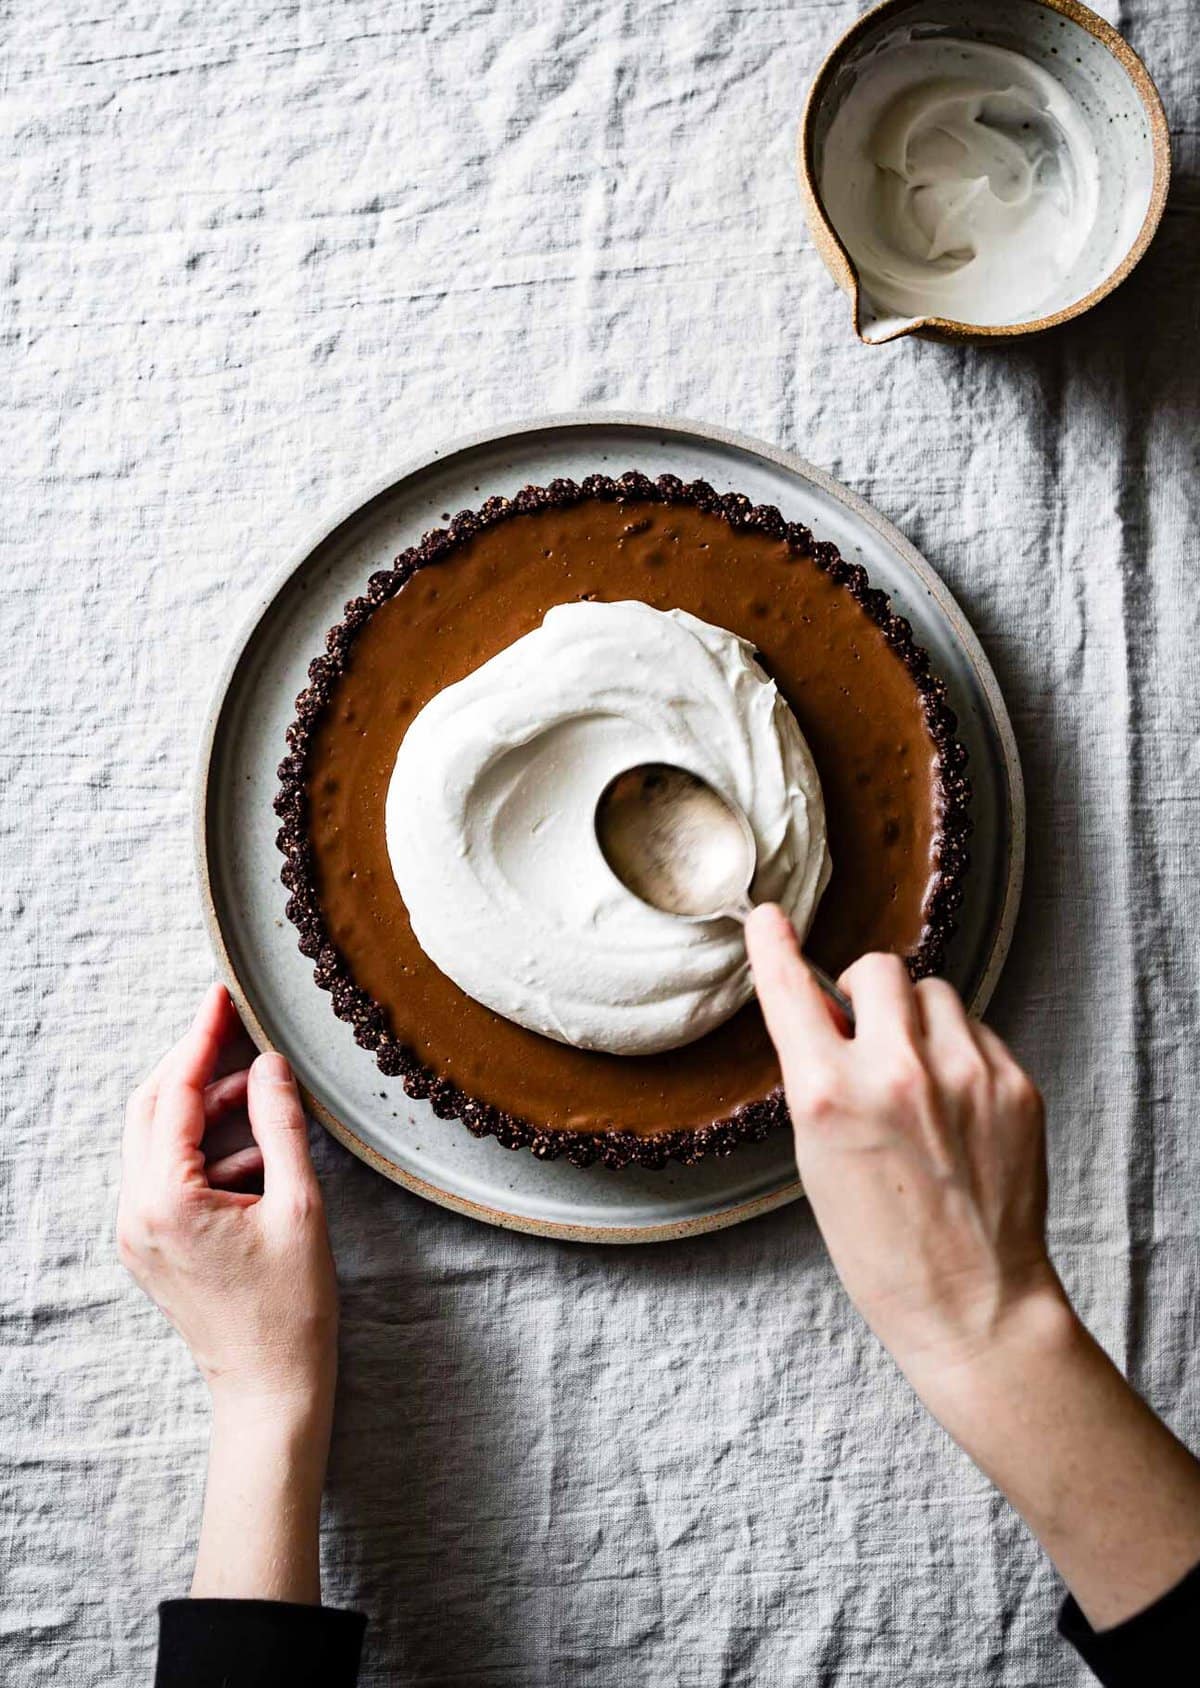 hands are swirling cream over a chocolate tart